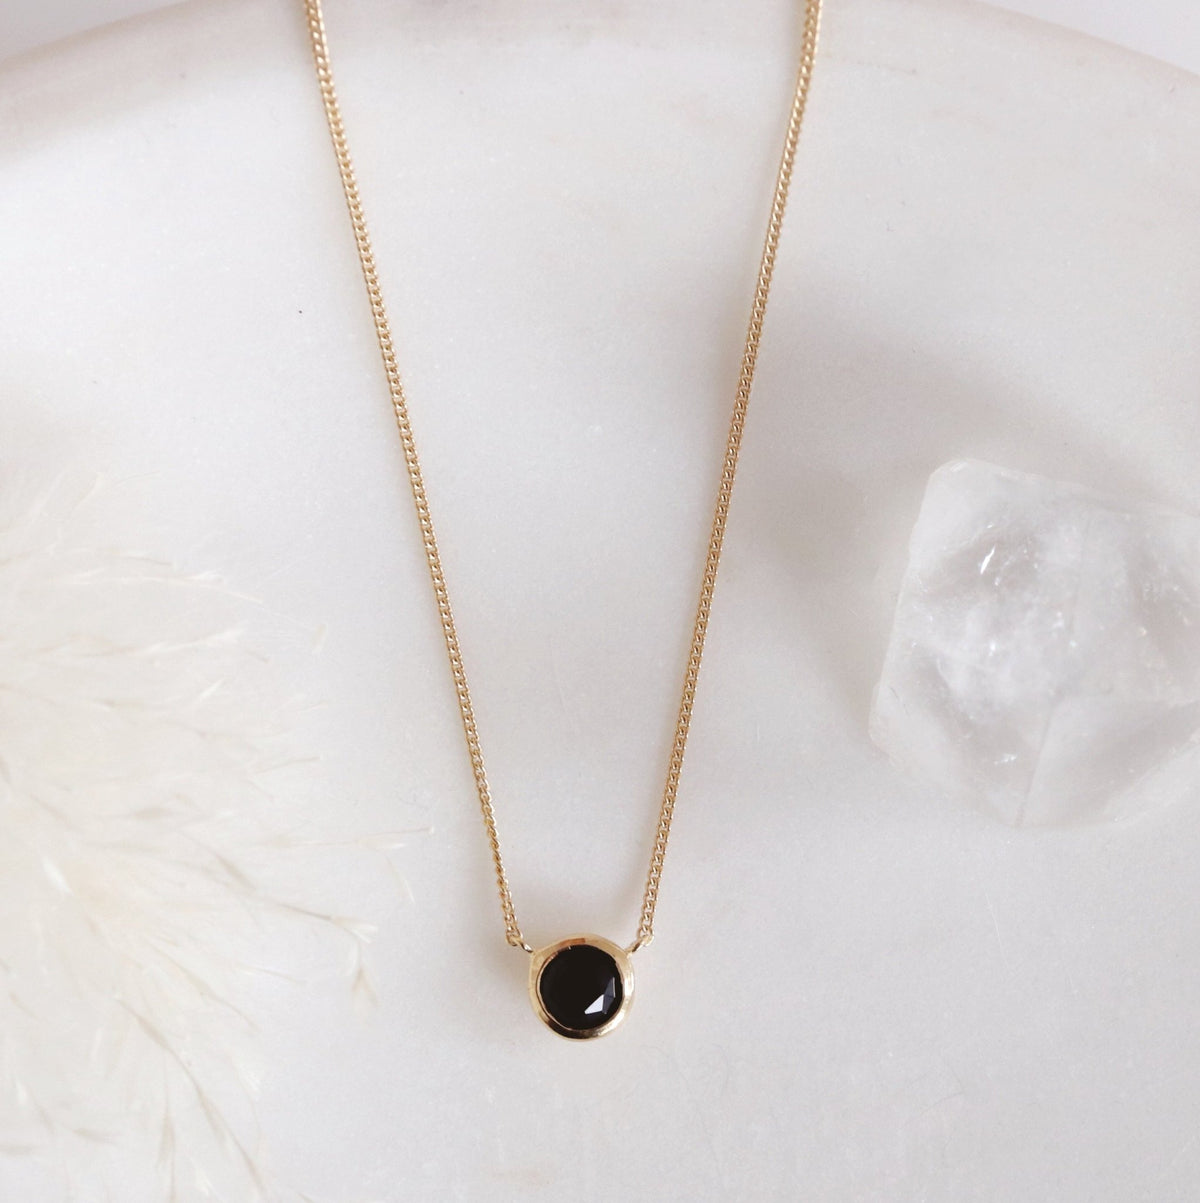 DAINTY LEGACY NECKLACE - BLACK ONYX &amp; GOLD - SO PRETTY CARA COTTER